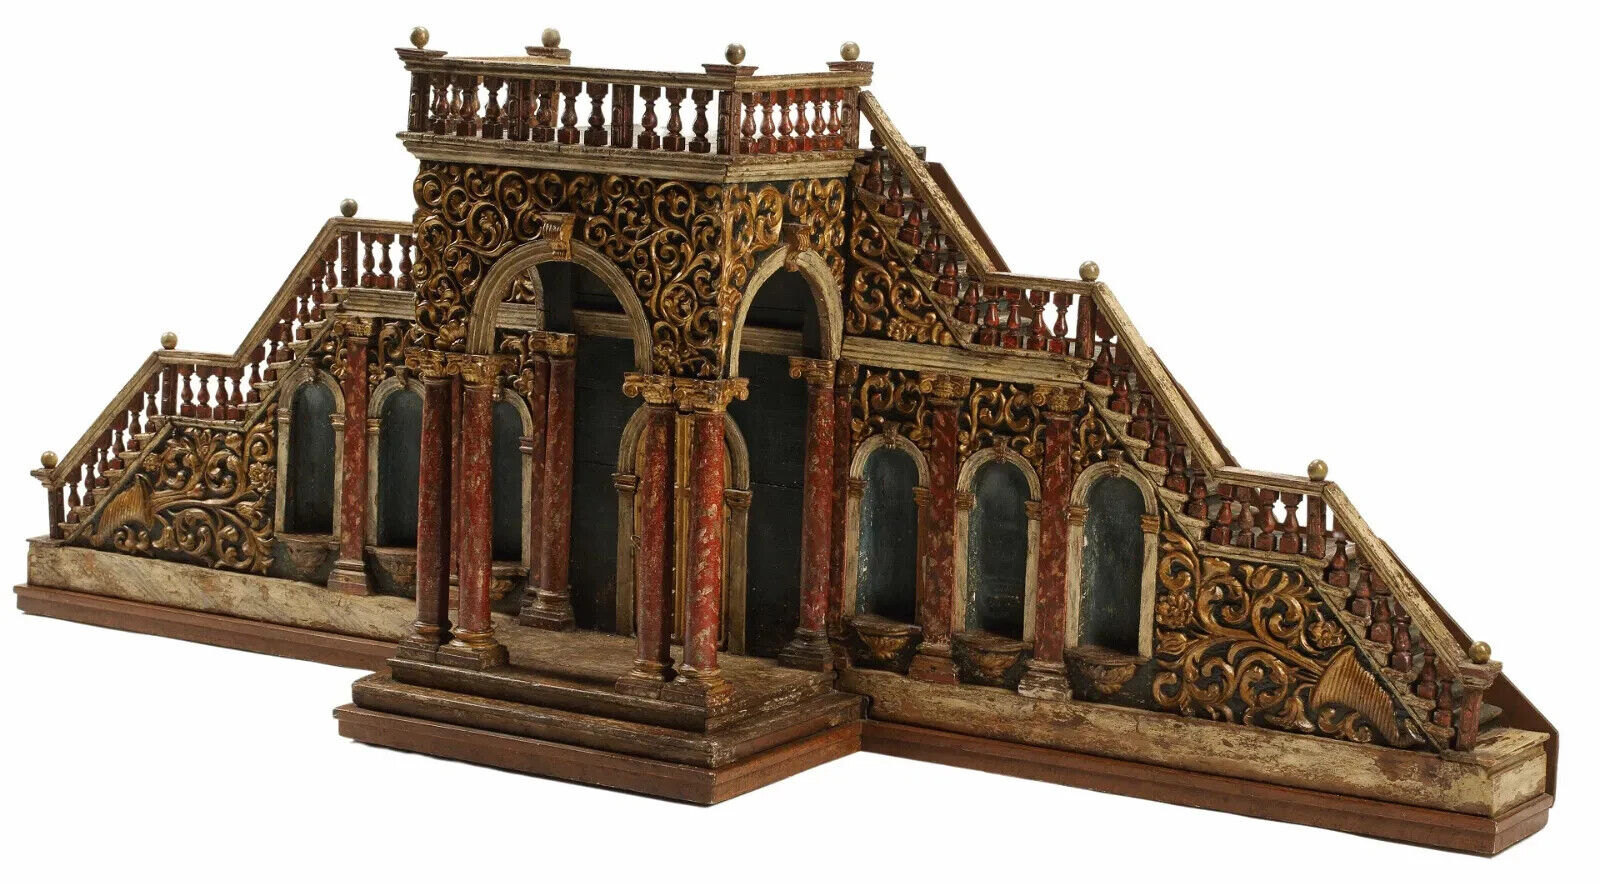 Antique Architectural Model, Italiante Carved & Polychrome Wood, Home Decor